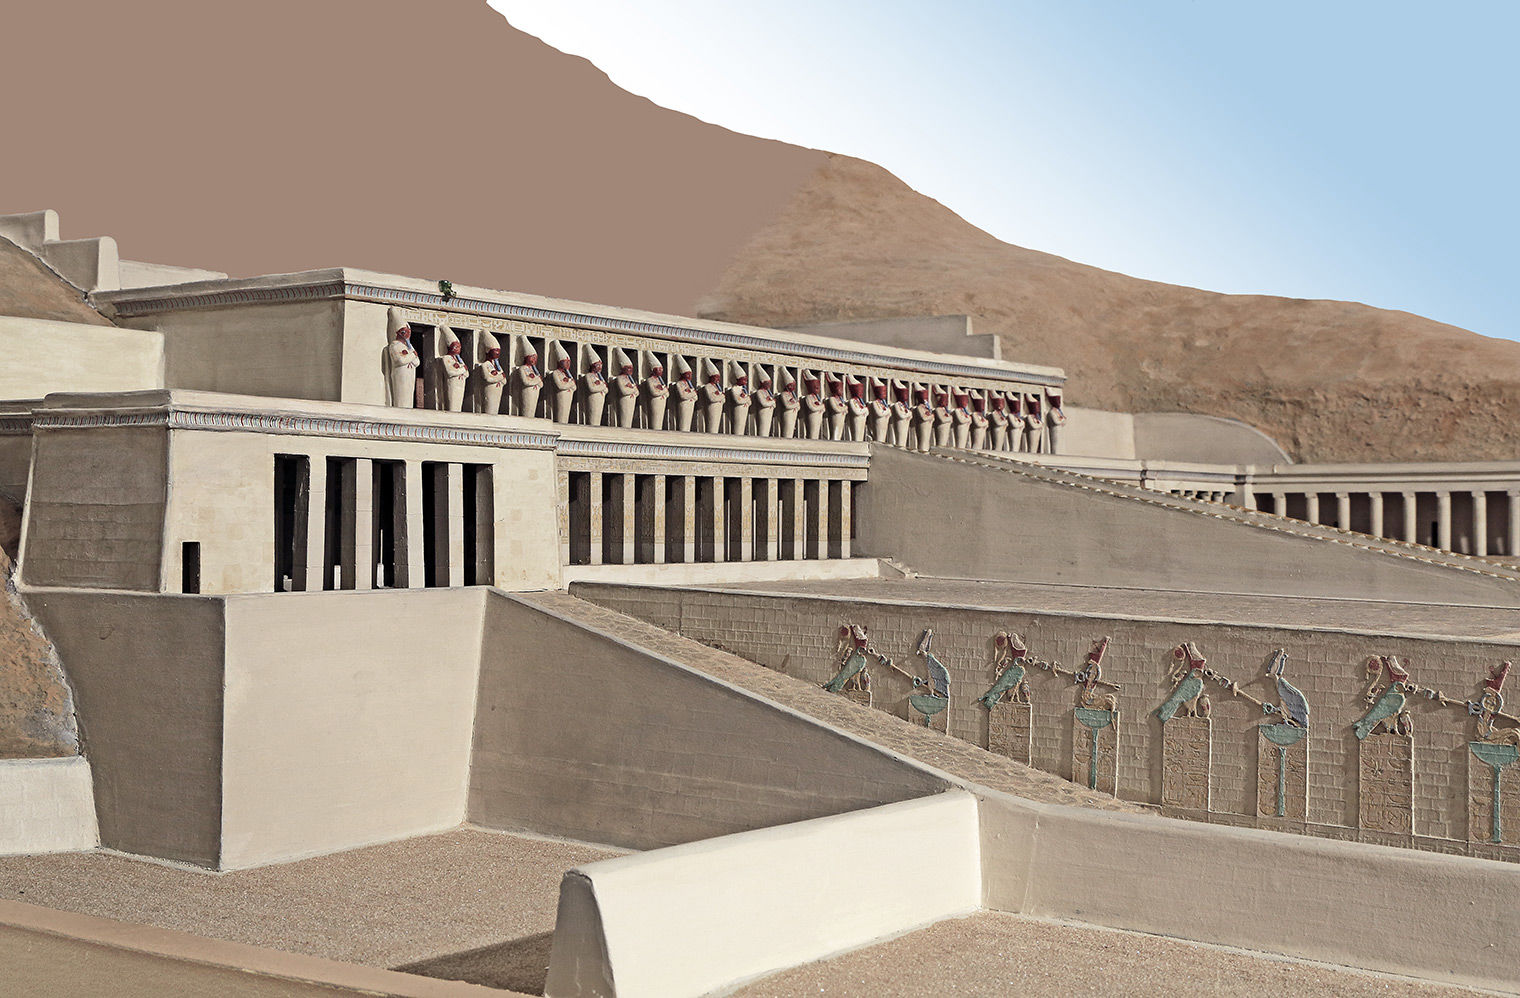 Terraced temple from the side, in a sandy landscape. On the visible wall are rectangles with crowned falcons and cobras on top, in green and red.